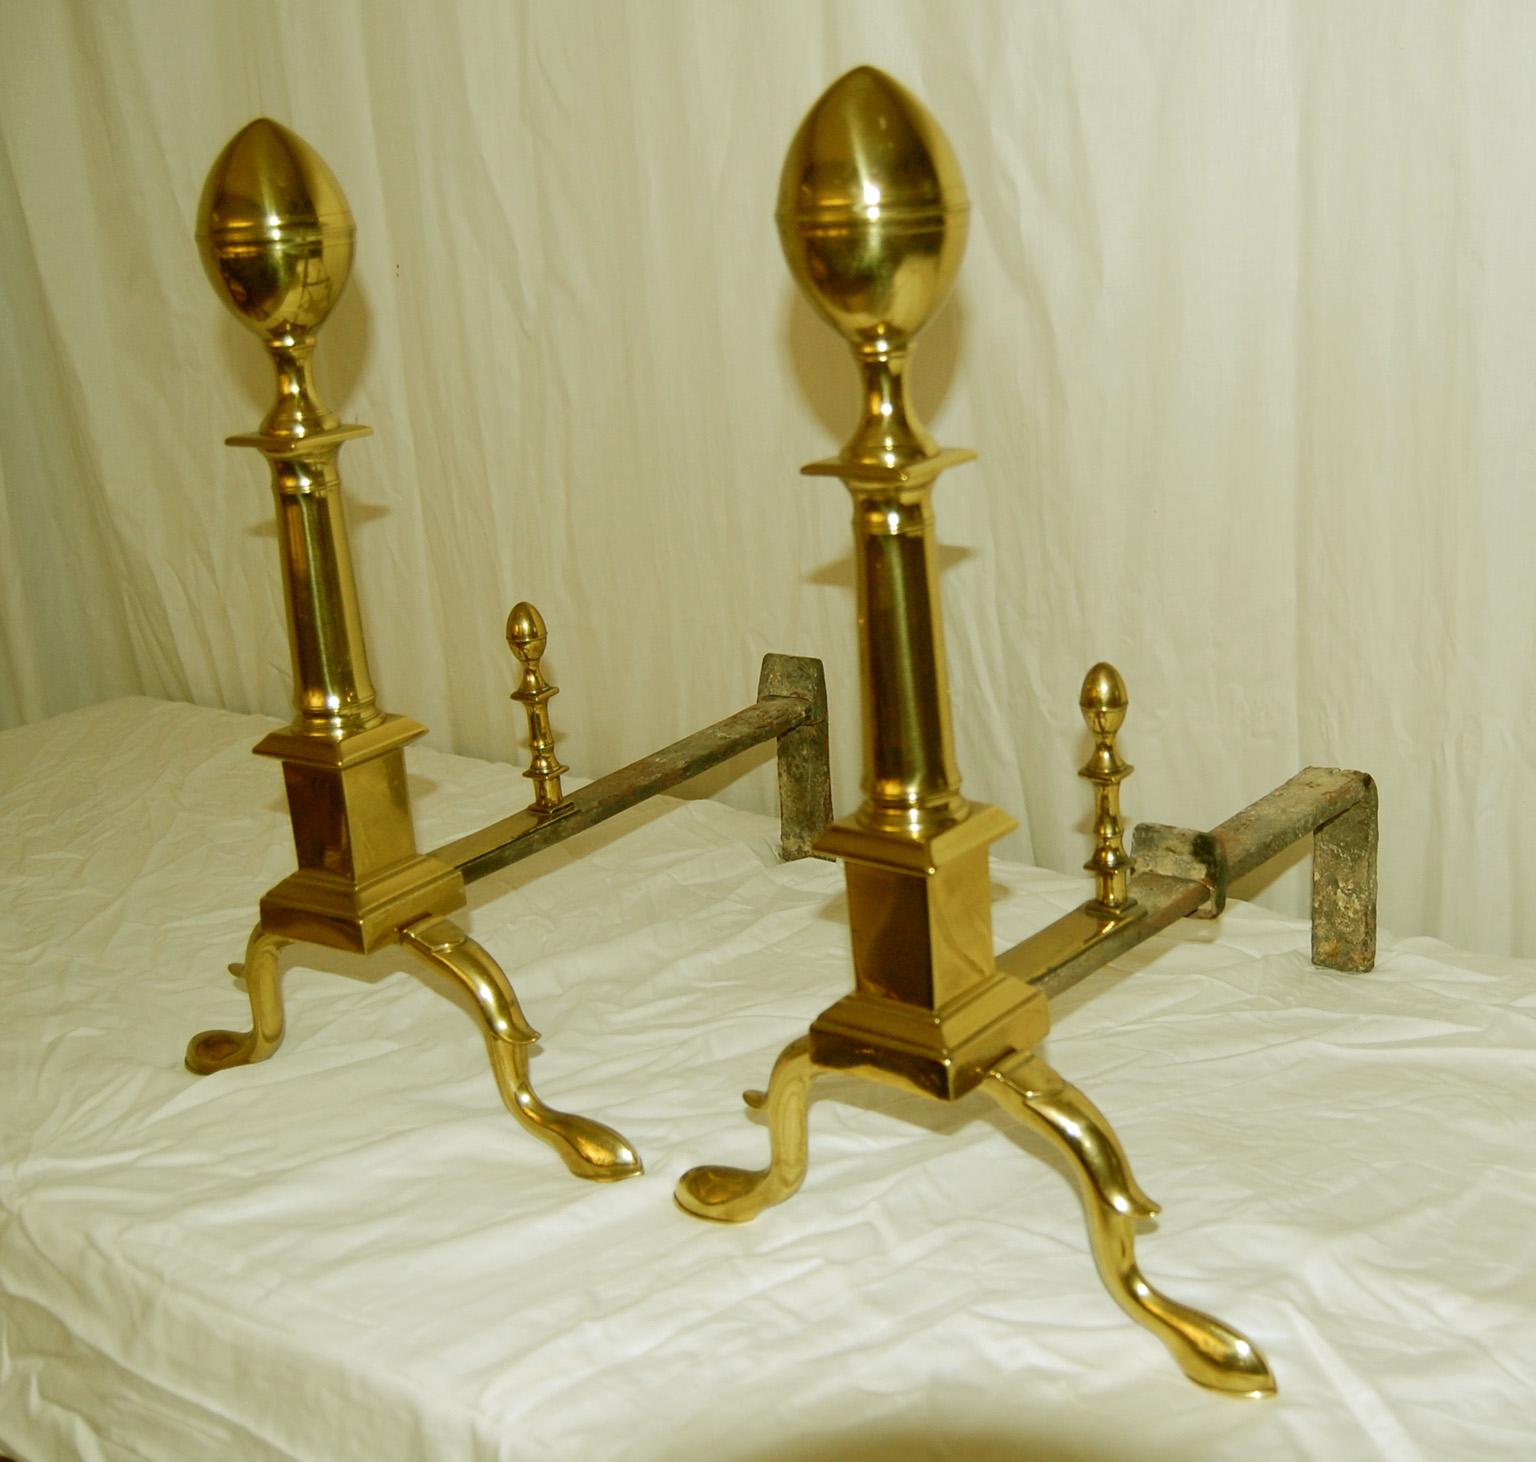  American Federal cast brass seamed 20 inch high lemon top andirons with slipper feet and iron log holders.  This pair of quite substantial andirons retain their original lemon top log stops.   Their elegant simplicity is a hall mark of fine federal